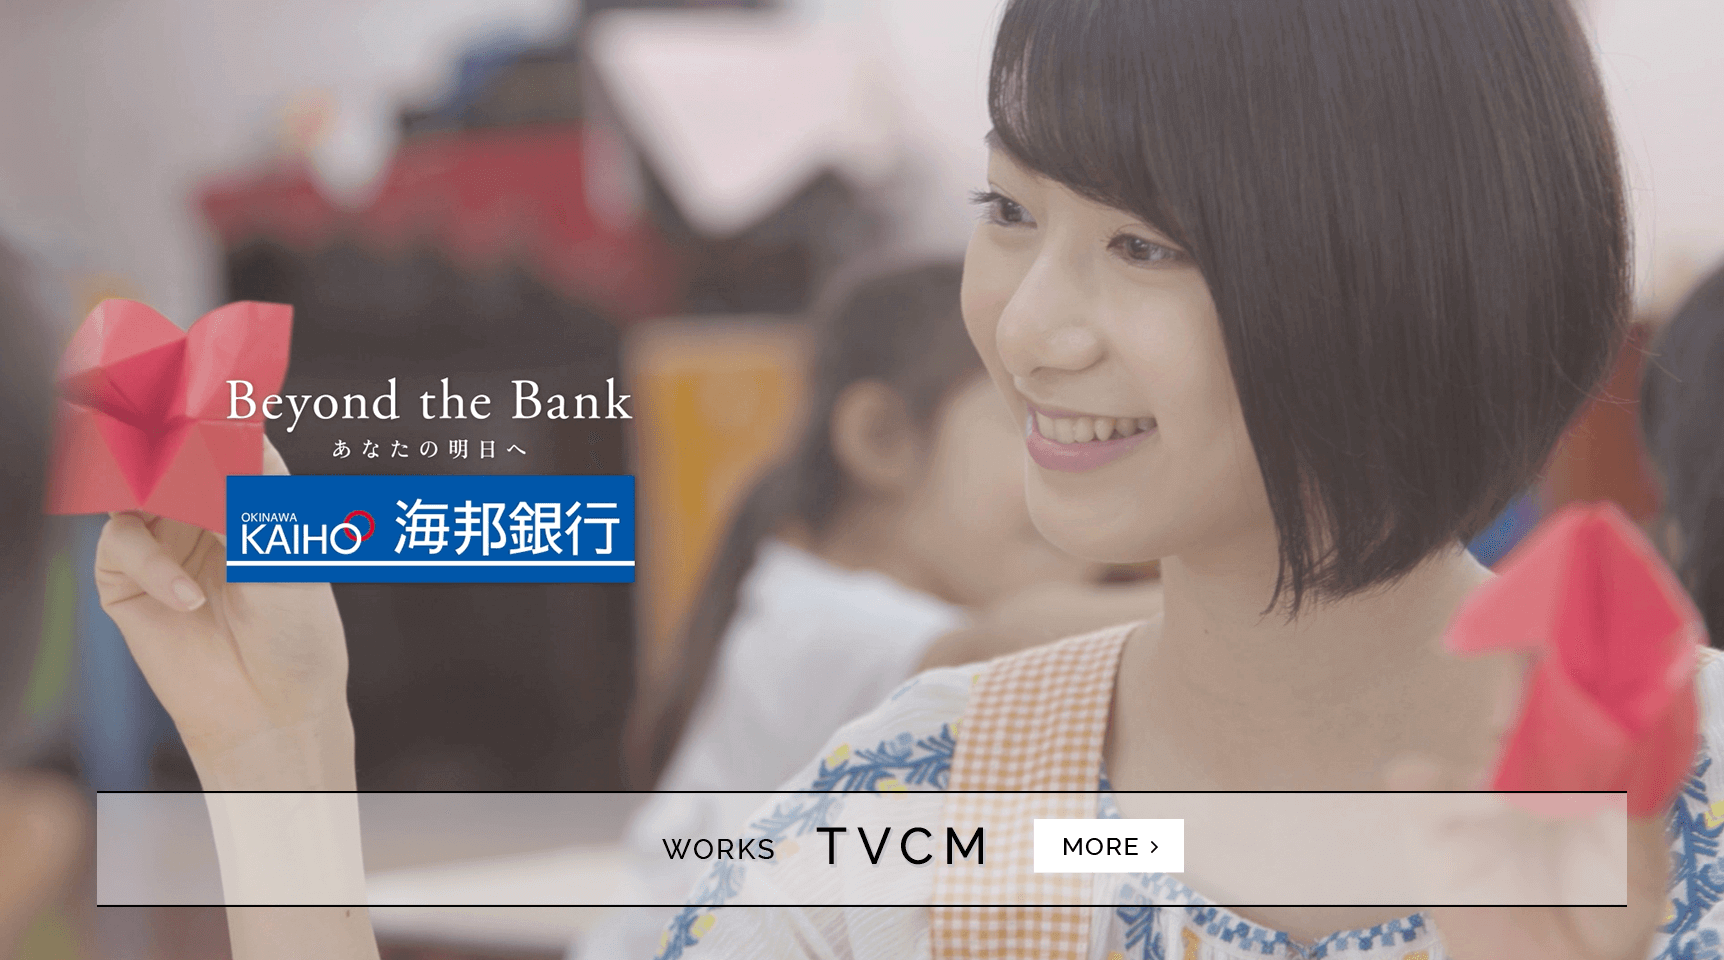 Beyond the Bank あなたの明日へ 海邦銀行 WORKS TVCM more